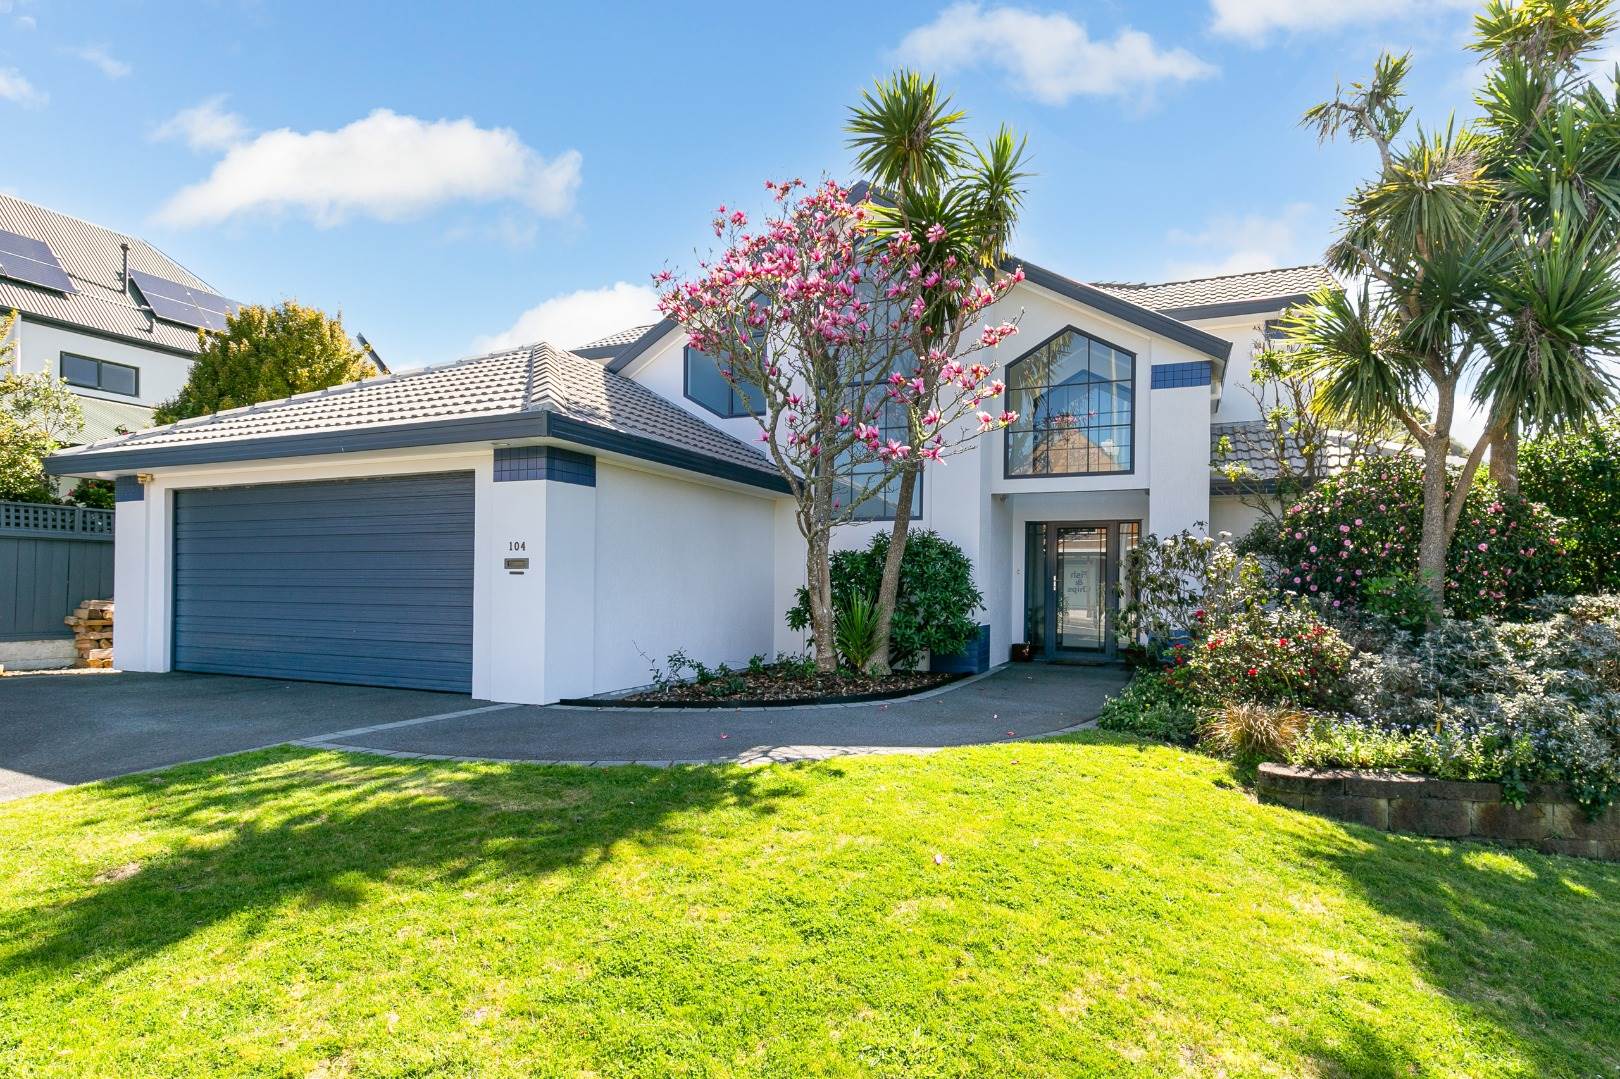 Real Estate For Rent Houses & Apartments : Welcome Home to Churton Park, Wellington